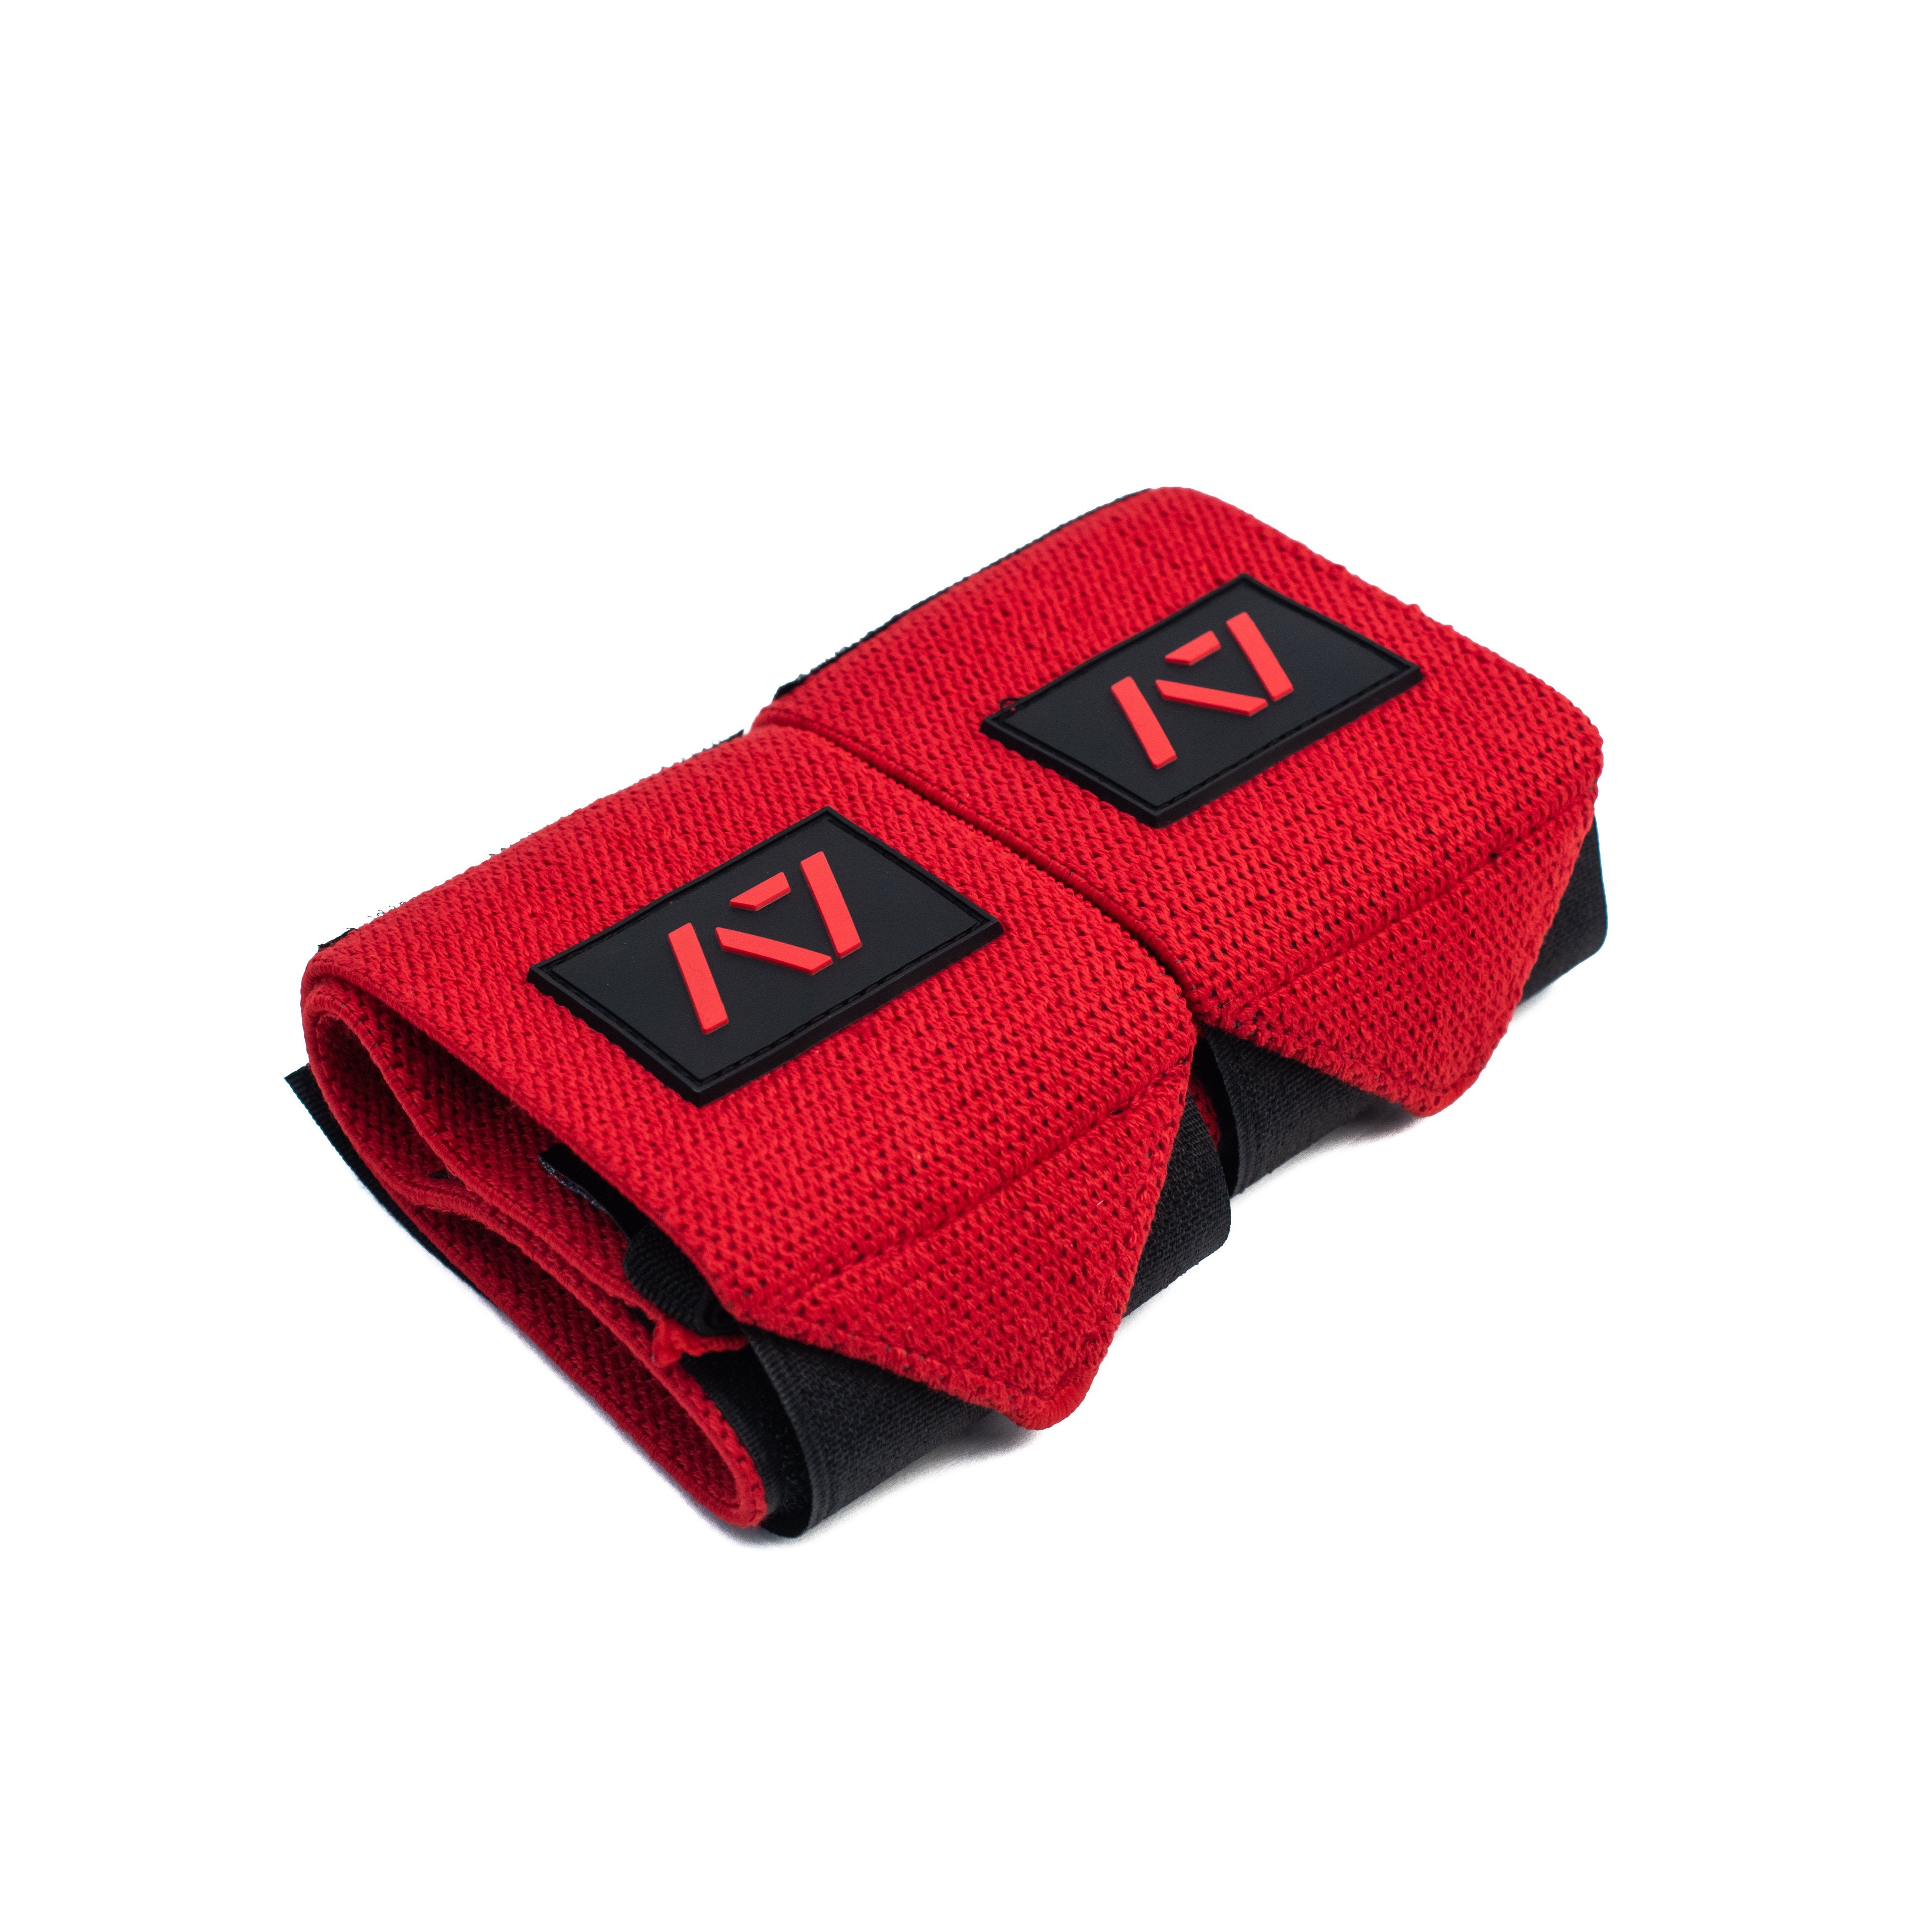 A7 Wrist Wraps are IPF approved. Inferno is the newest color combination to our Wrist Wraps. The classic black and red colorway you all loved in our FIRE USA meet tee can now partner with these wraps for a standout look like no other. Excited to see you set some new PBs in these wraps and show off your Inferno spirt from within. A7 wrist wraps are a perfect addition to your IPF approved kit.